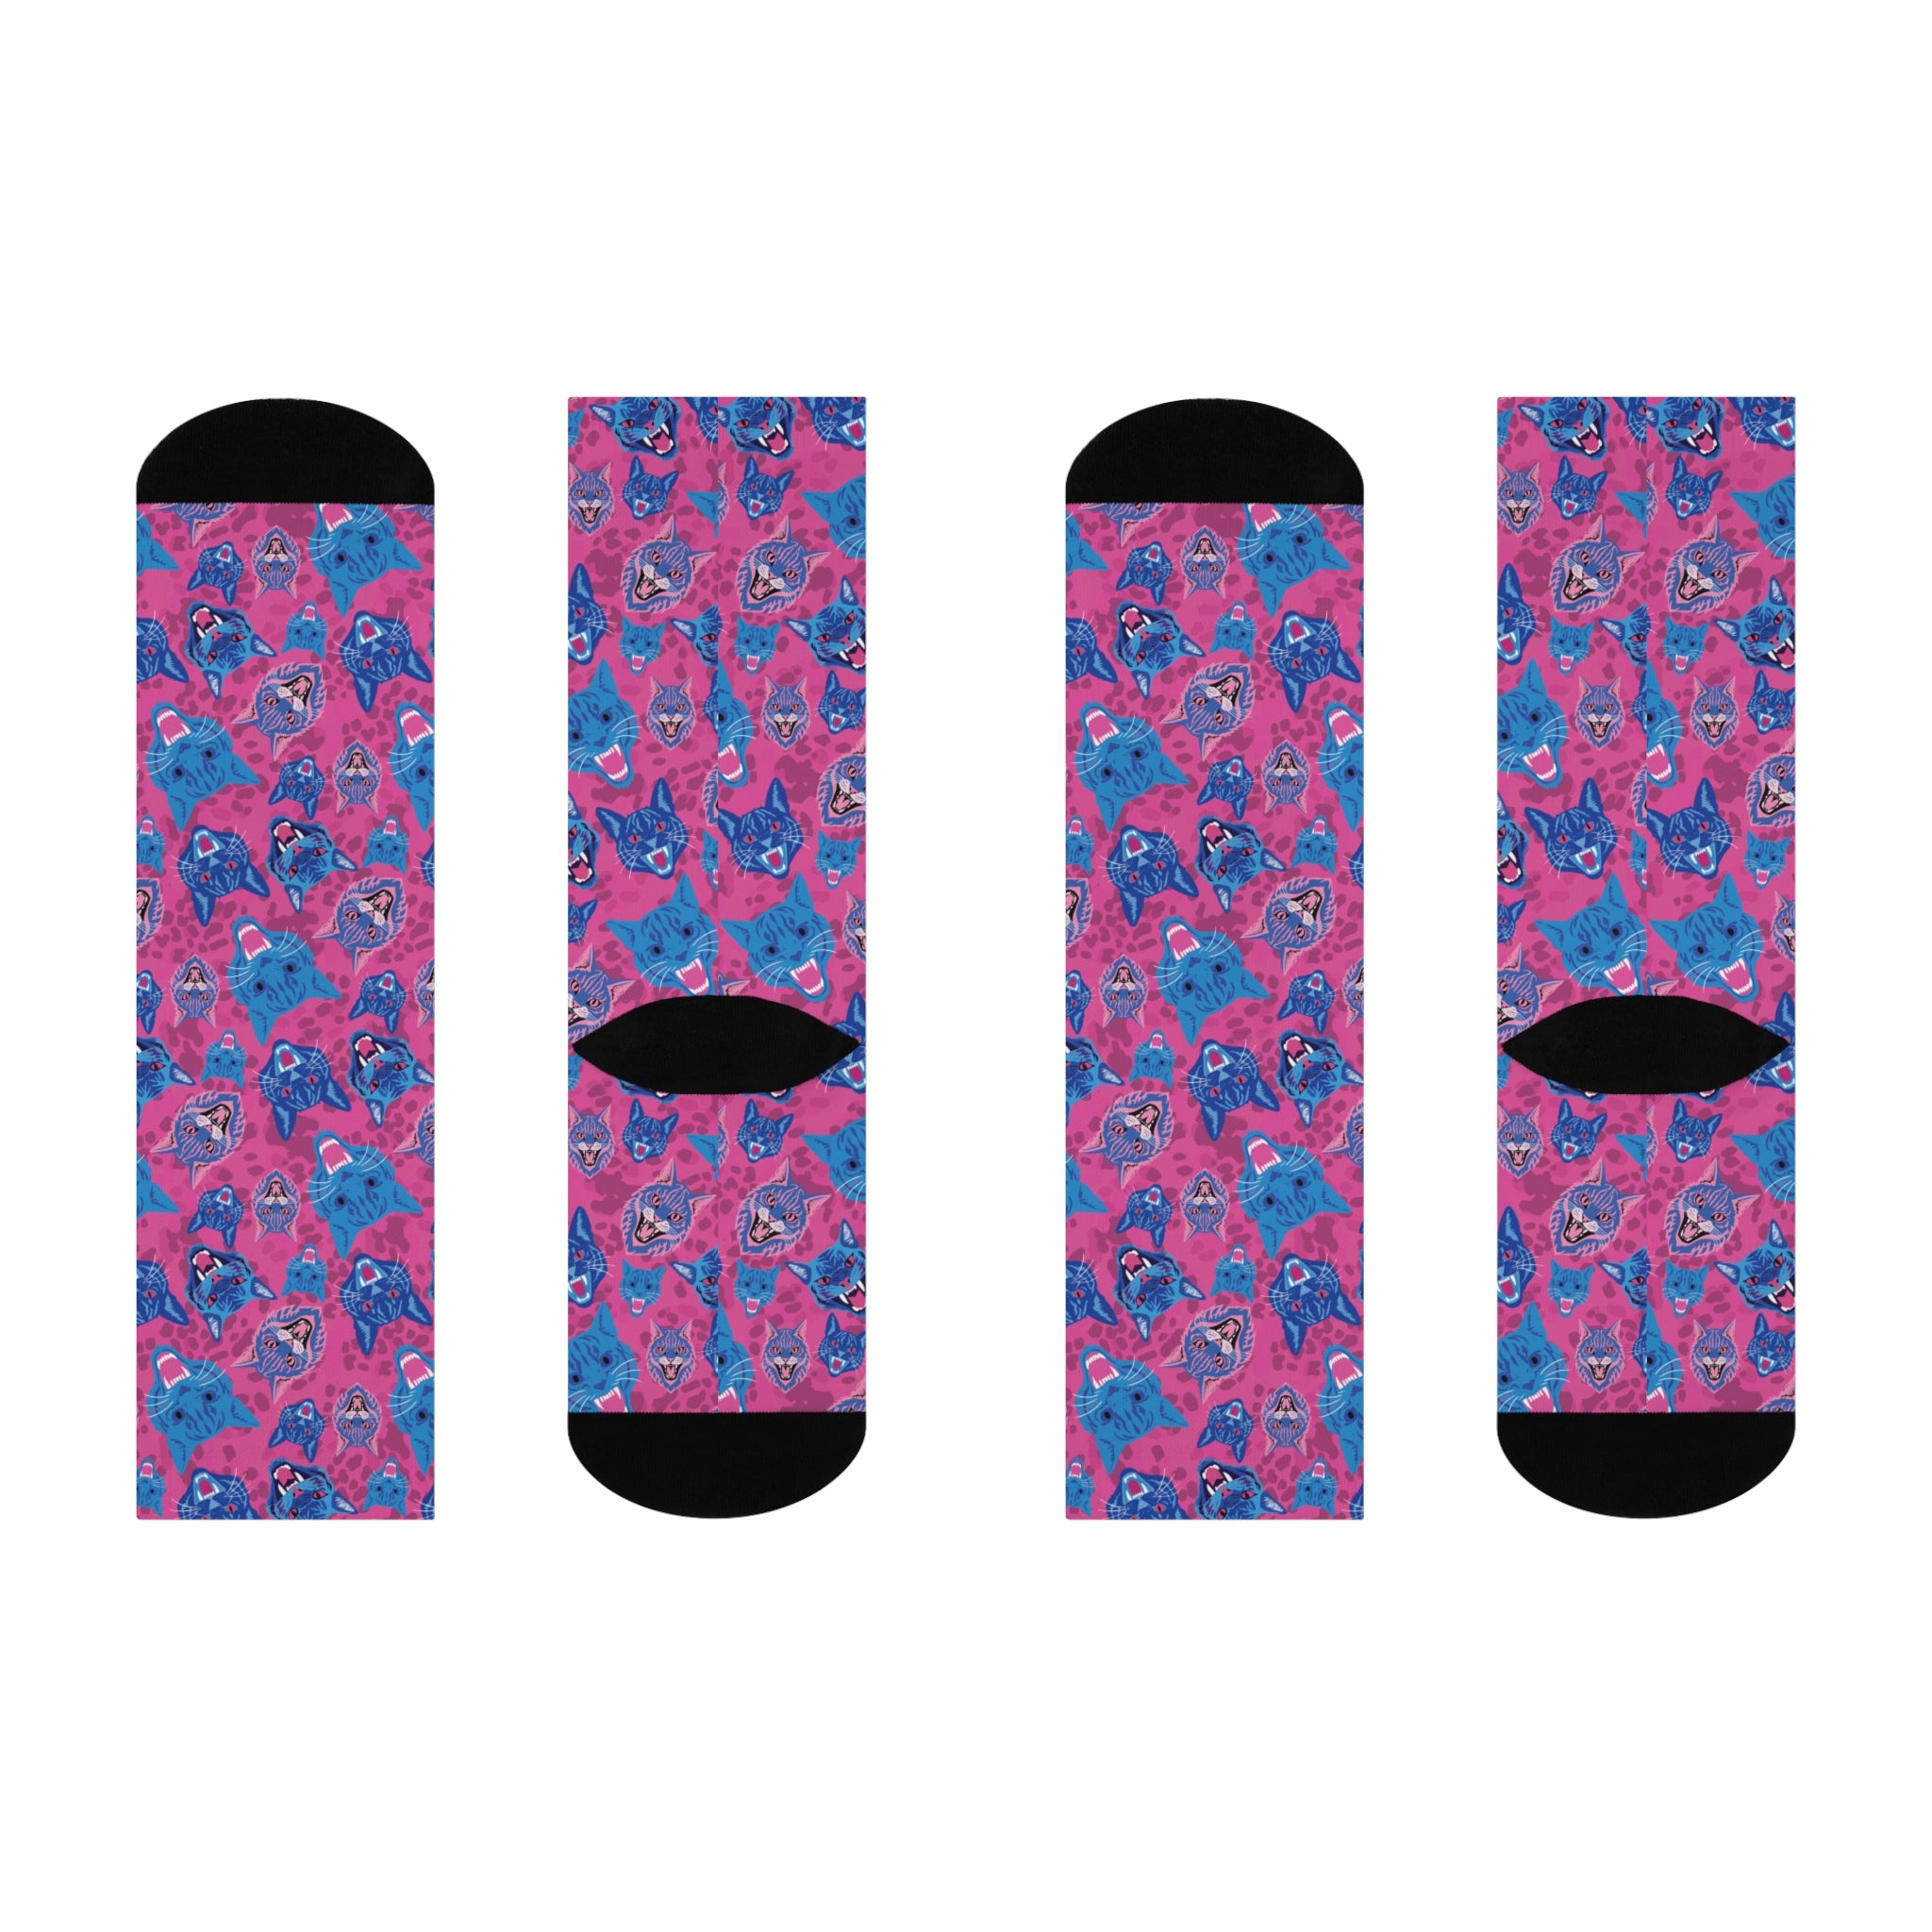 Fun and playful socks adorned with vibrant tiger head motifs on a pink background, with black heels and toes, ideal for animal lovers and those who enjoy unique designs